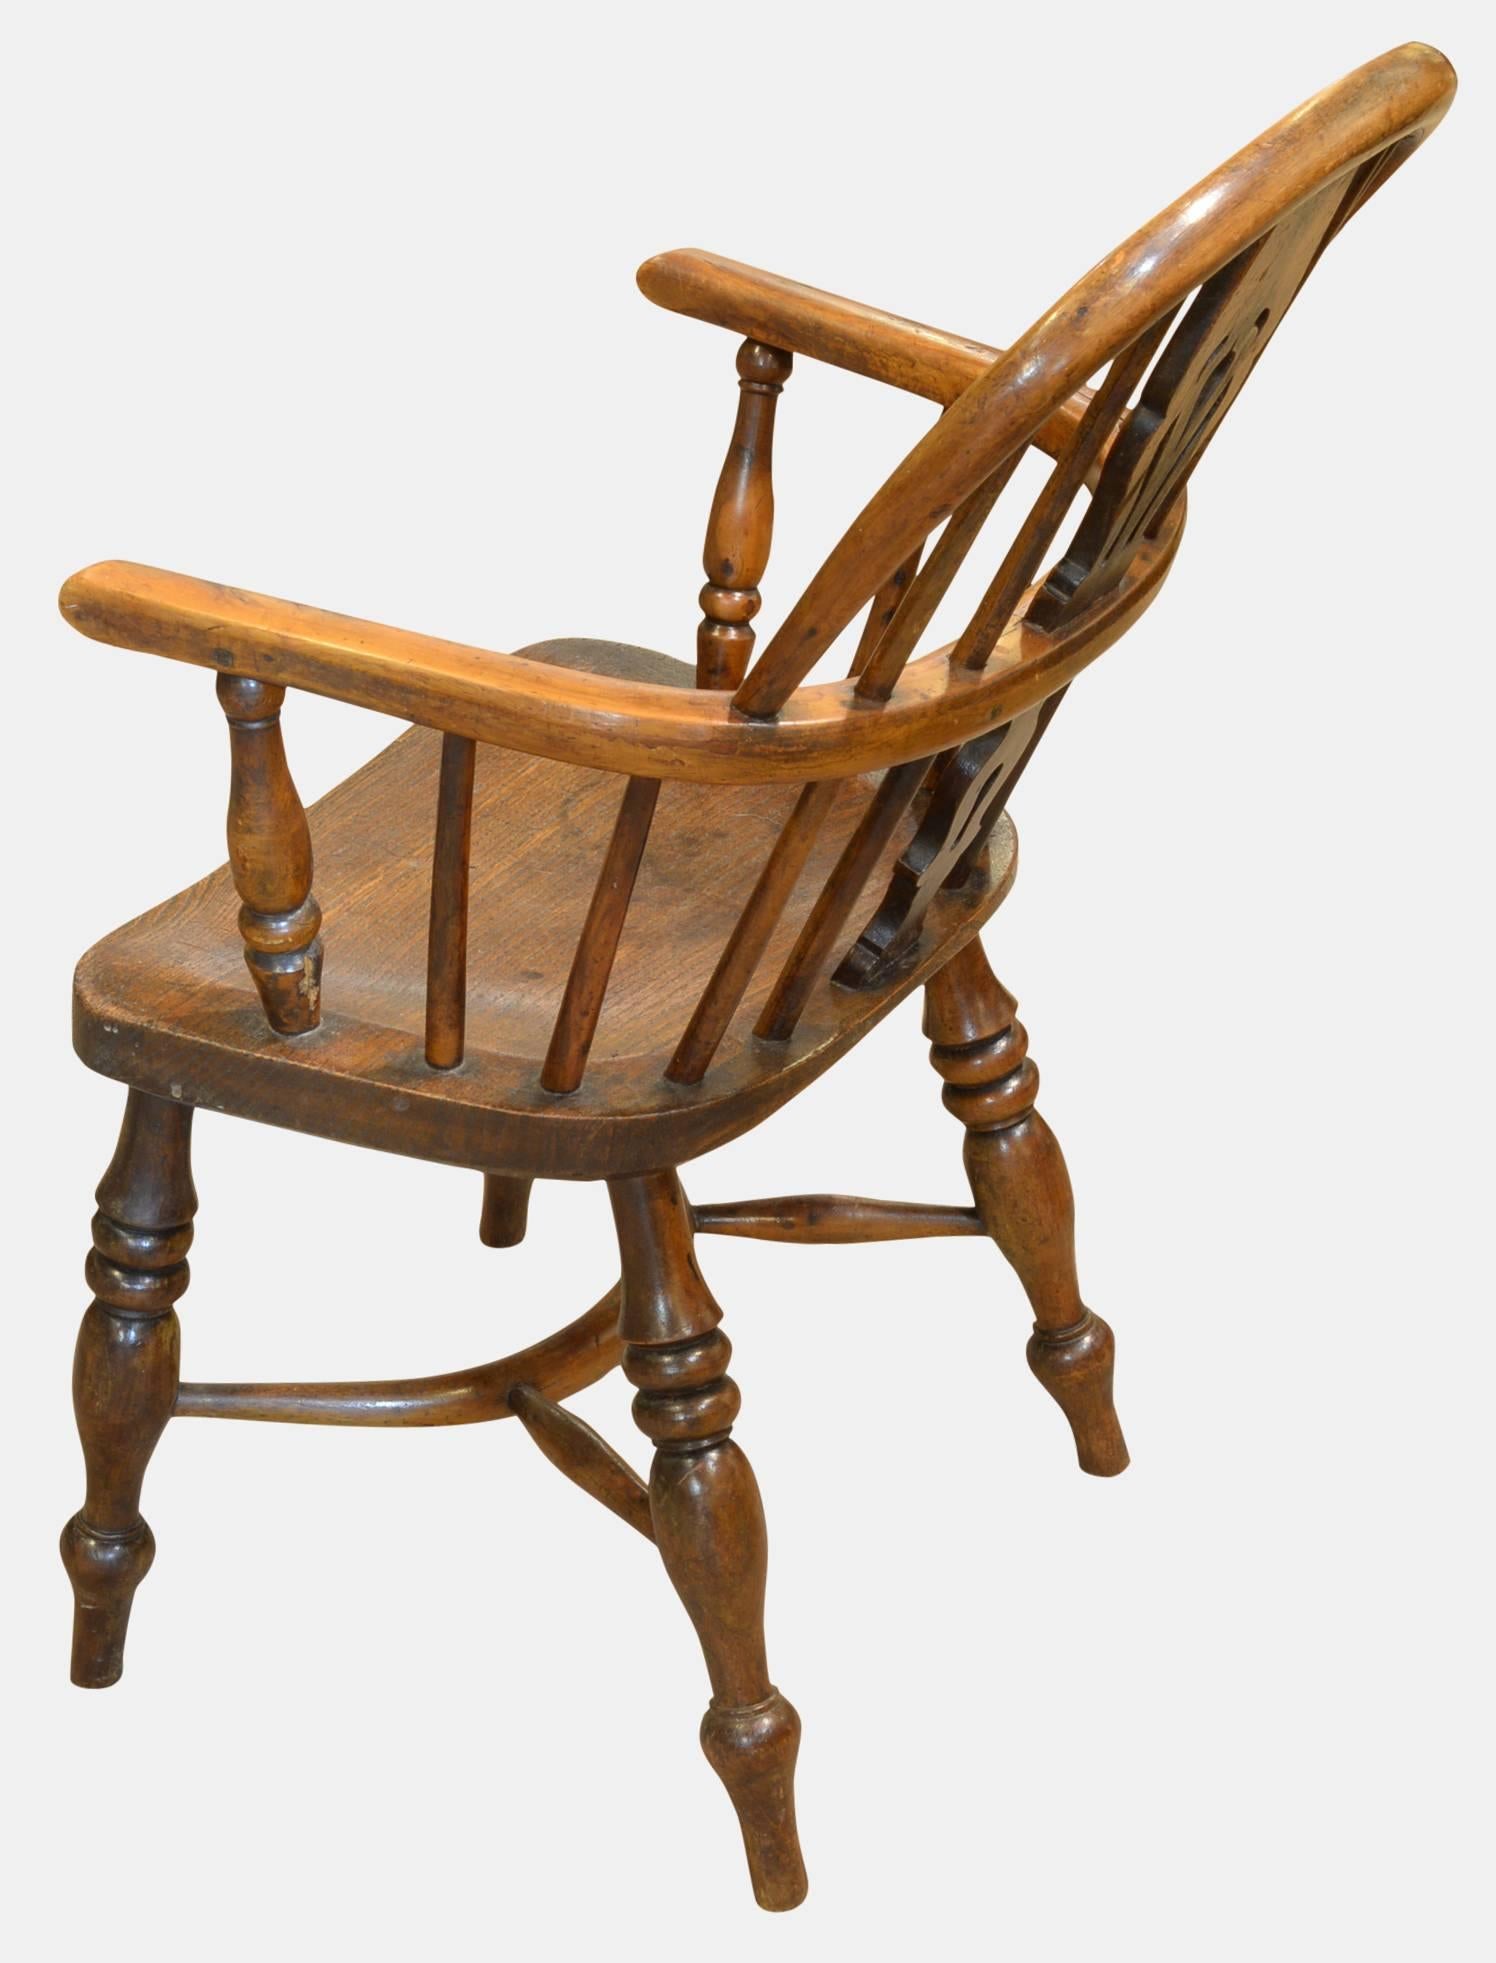 A good early 19th century child's yew-wood and elm seated, hoop back Windsor chair with crinoline stretcher,

circa 1830.